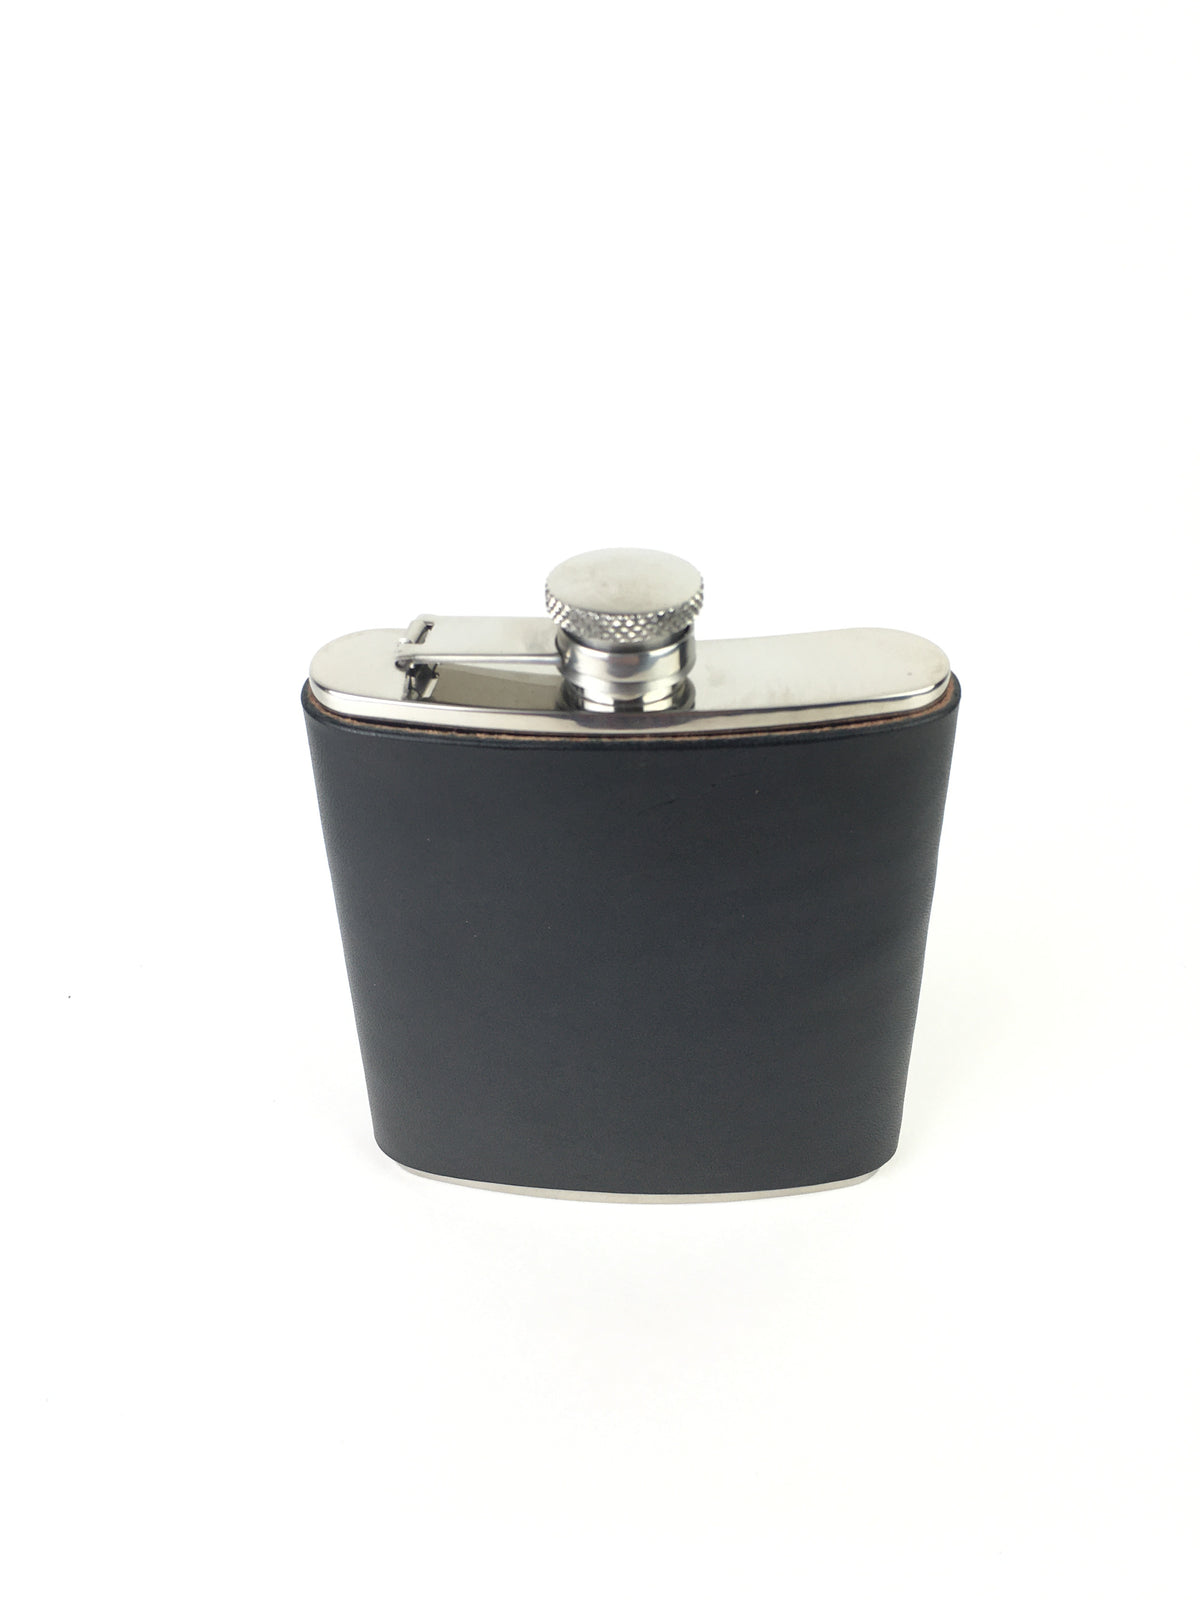 H+B WHISKY FLASK | BLACK LEATHER